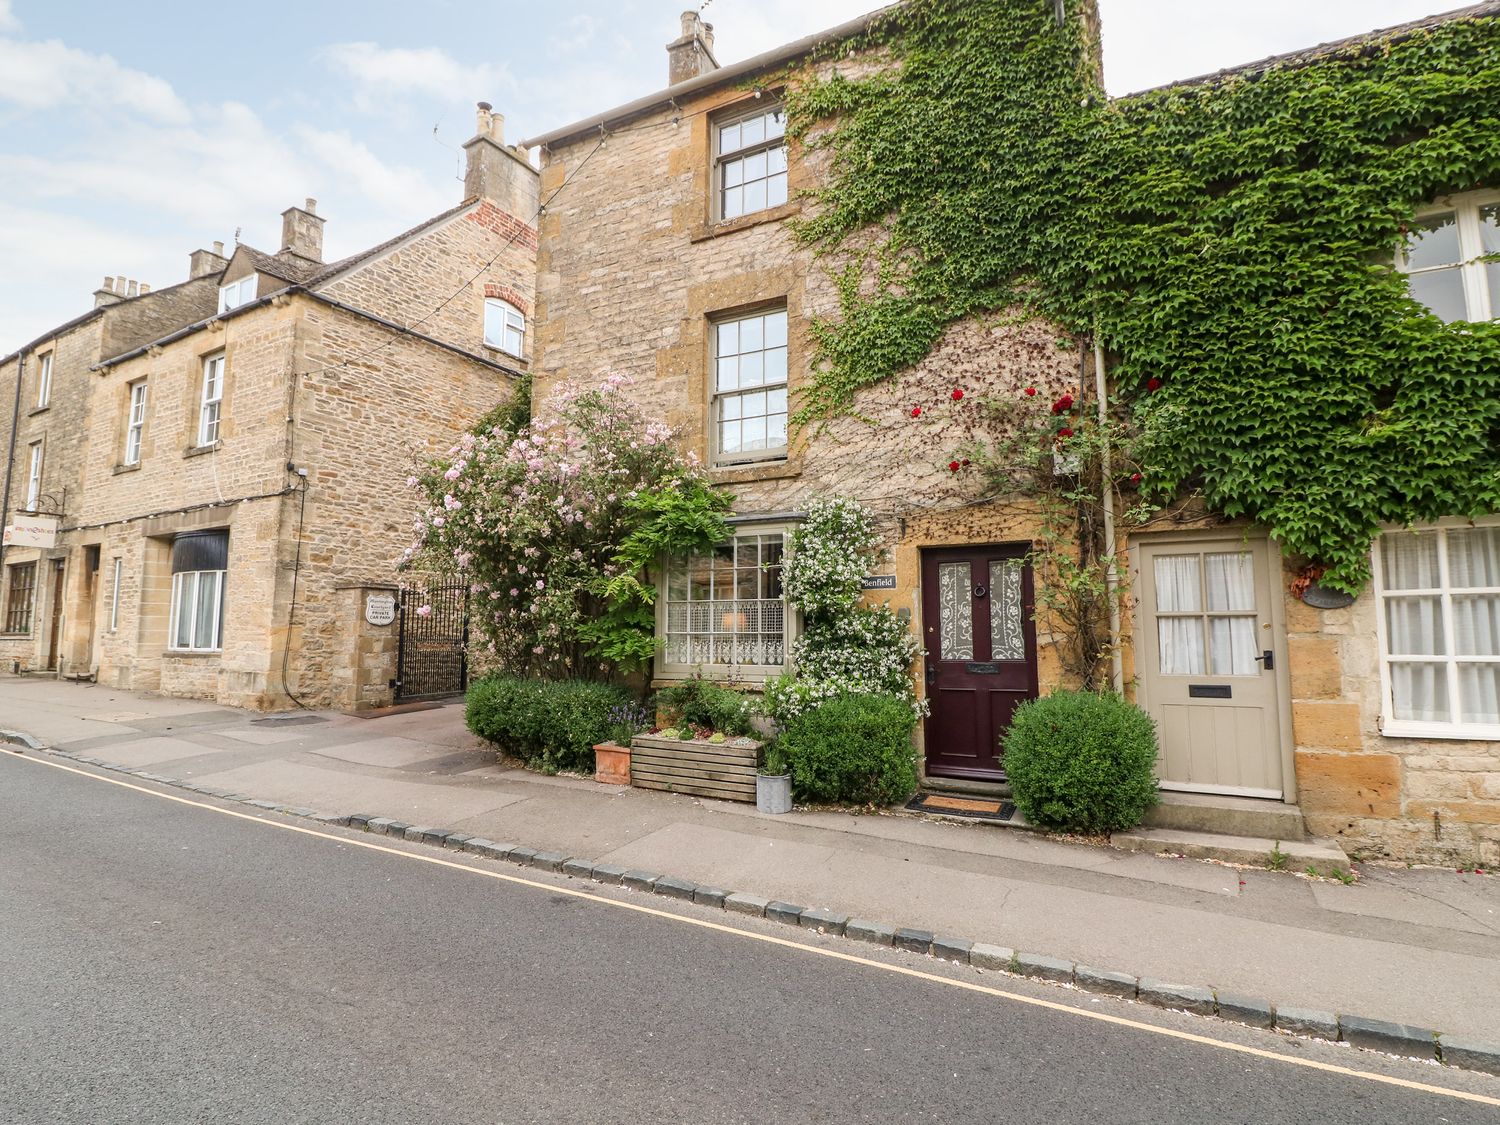 Benfield - Cotswolds - 988637 - photo 1